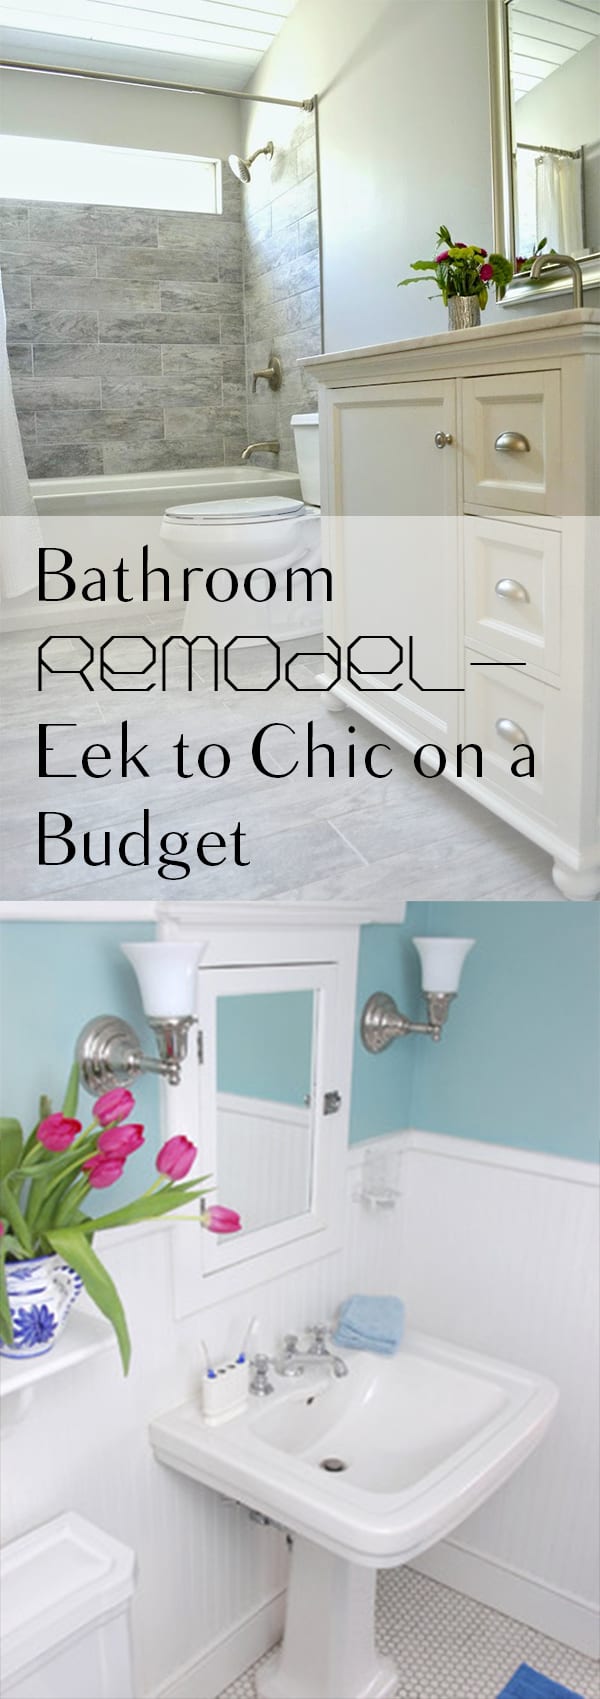 How to Remodel your bathroom from Eek to Chic on a budget ...